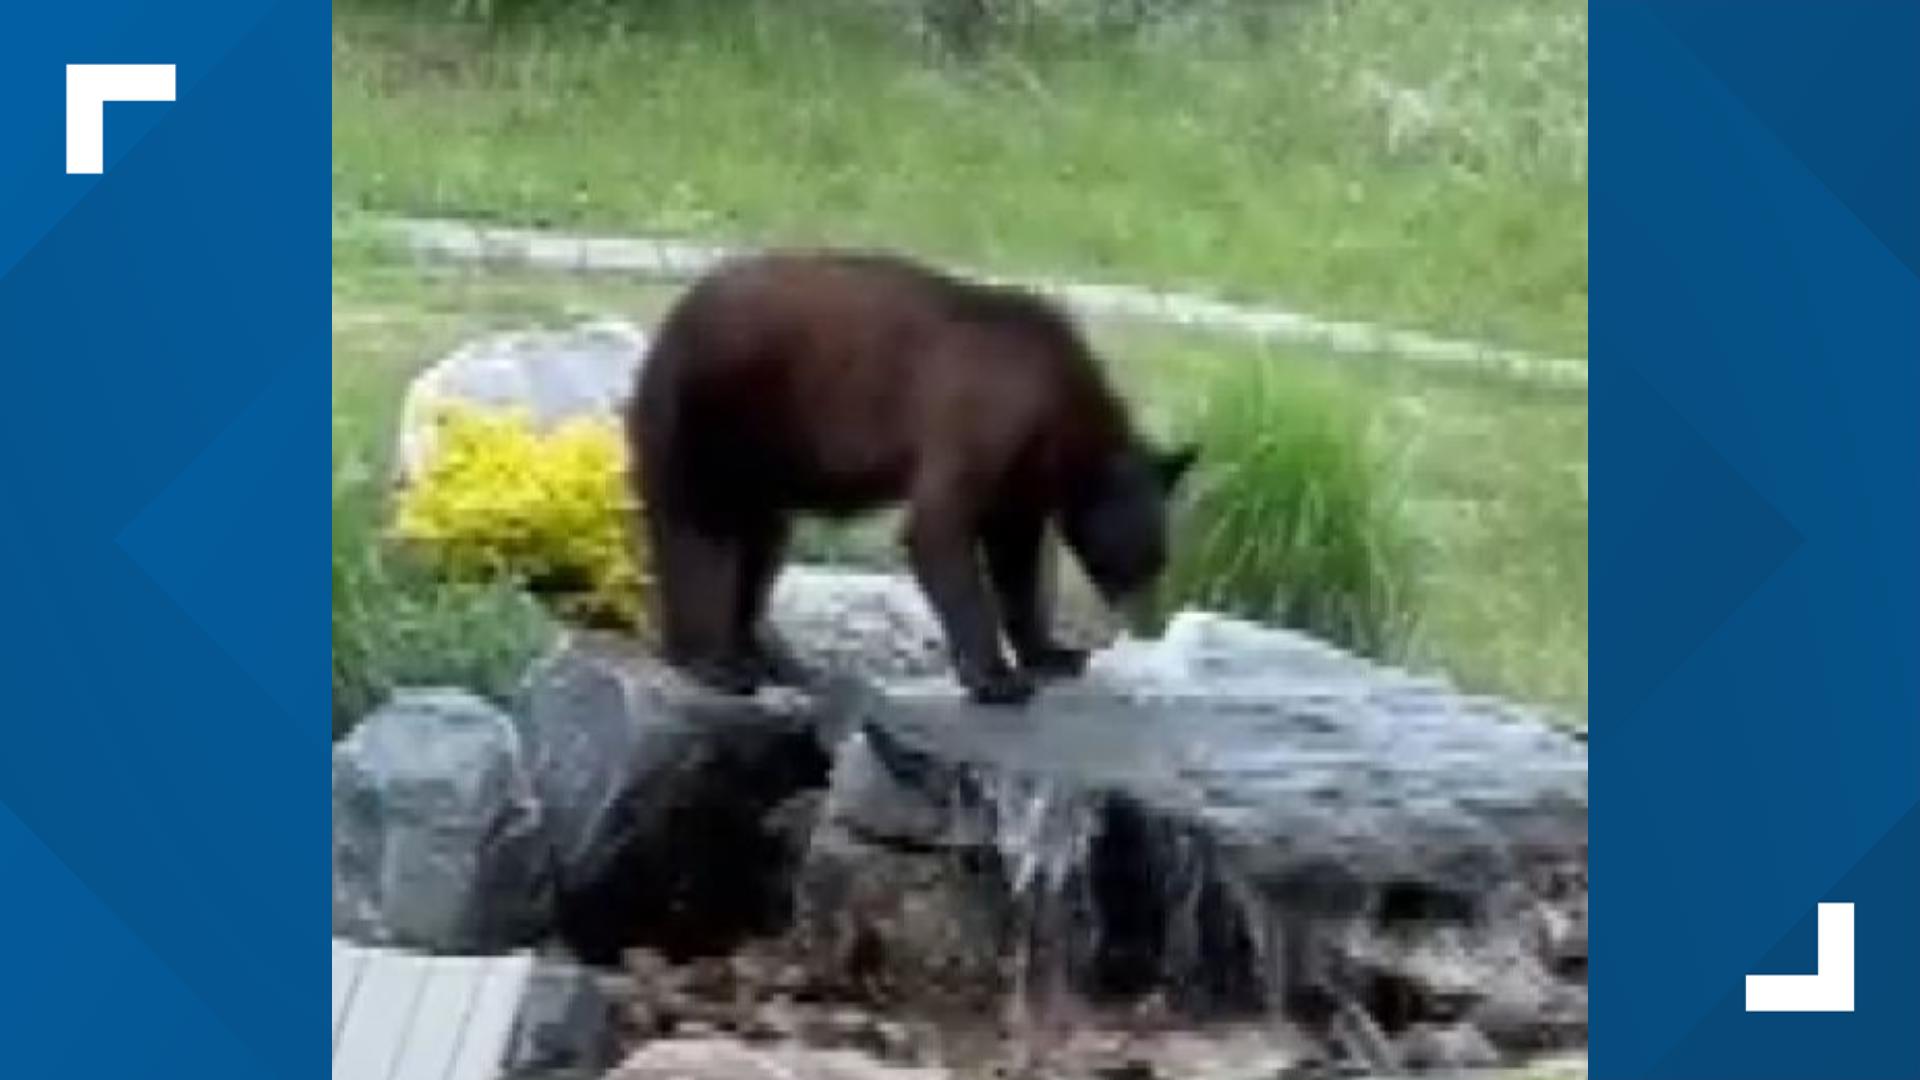 A bear quenched its thirst in a woman's backyard fountain Friday morning.